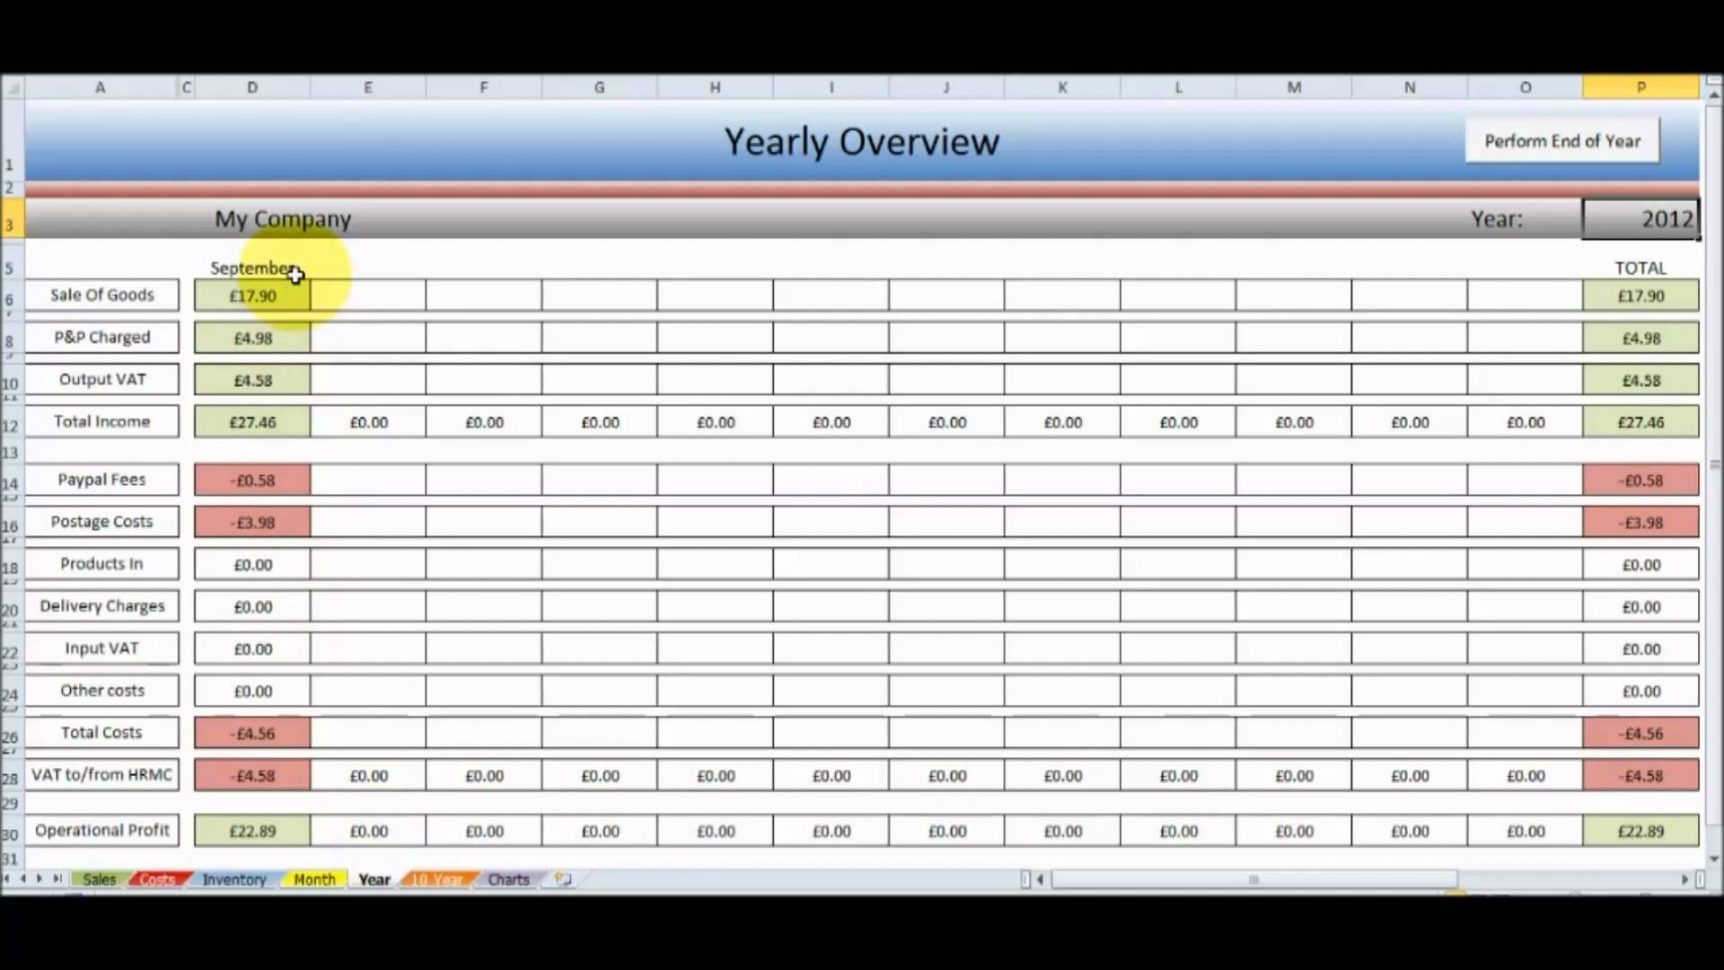 microsoft excel free download